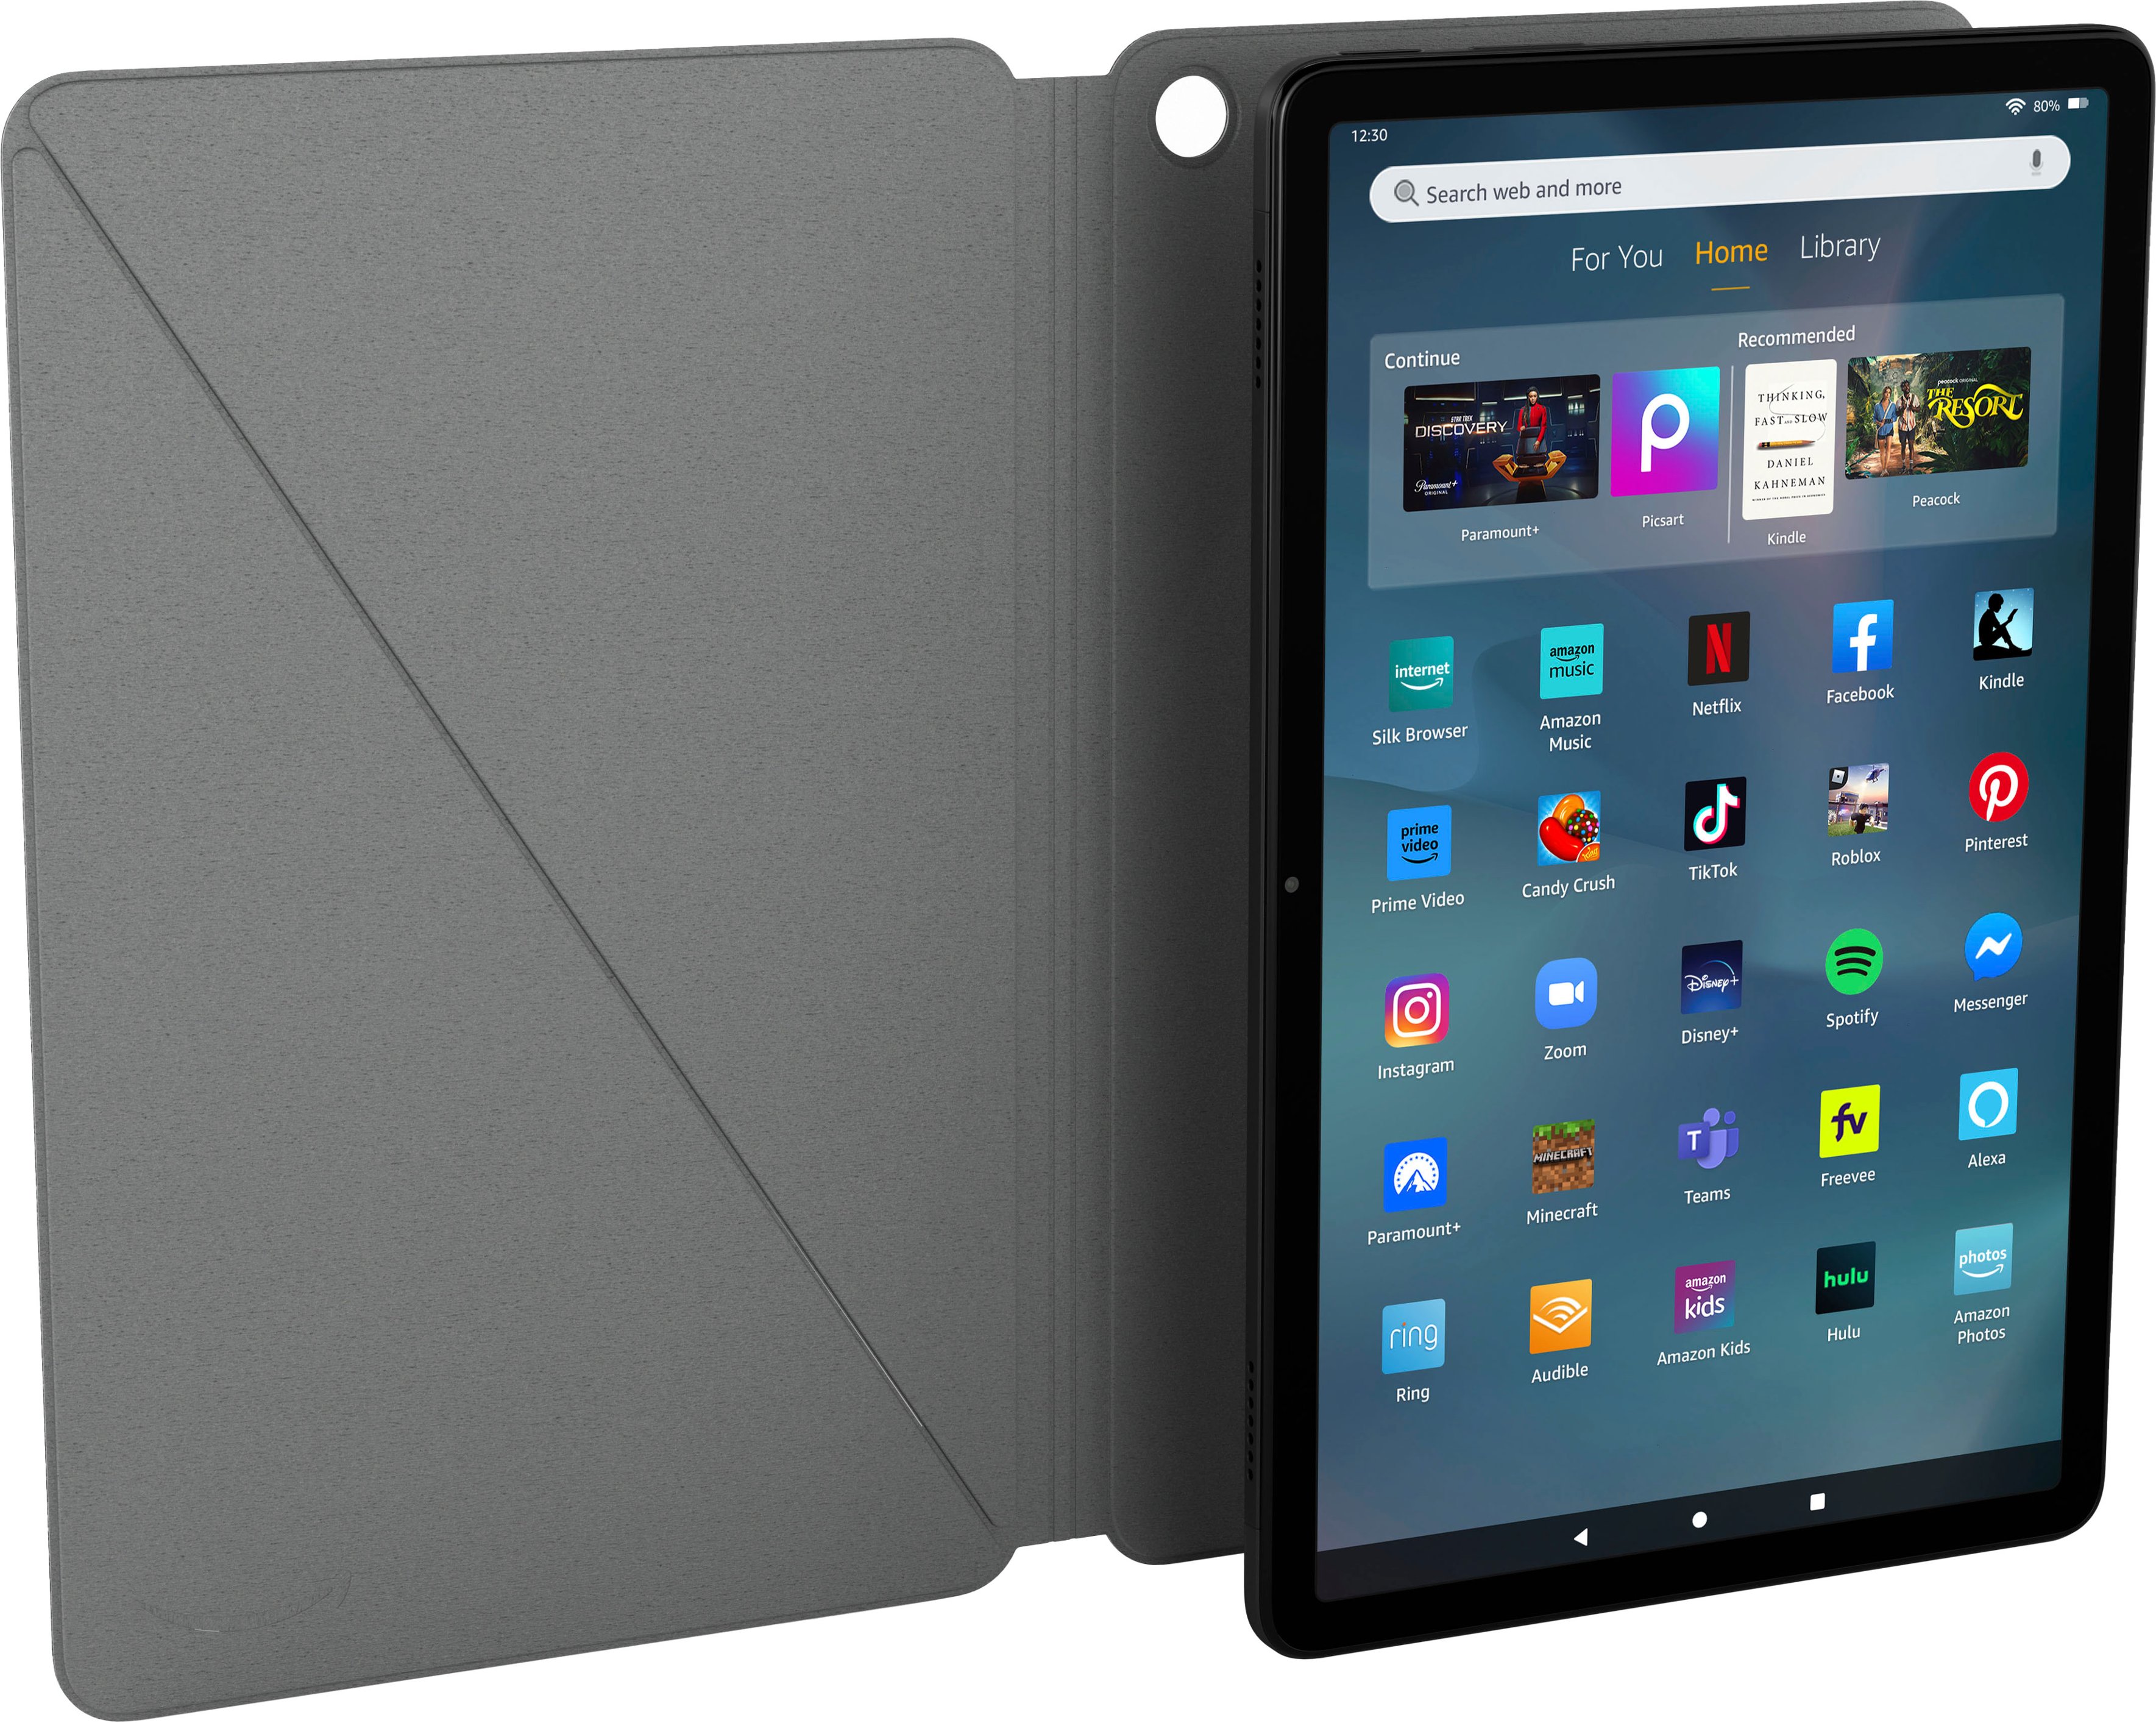 Fire Max 11 Tablet Magnetic Slim Cover (Only compatible with 13th  generation tablet, 2023 release) - Black